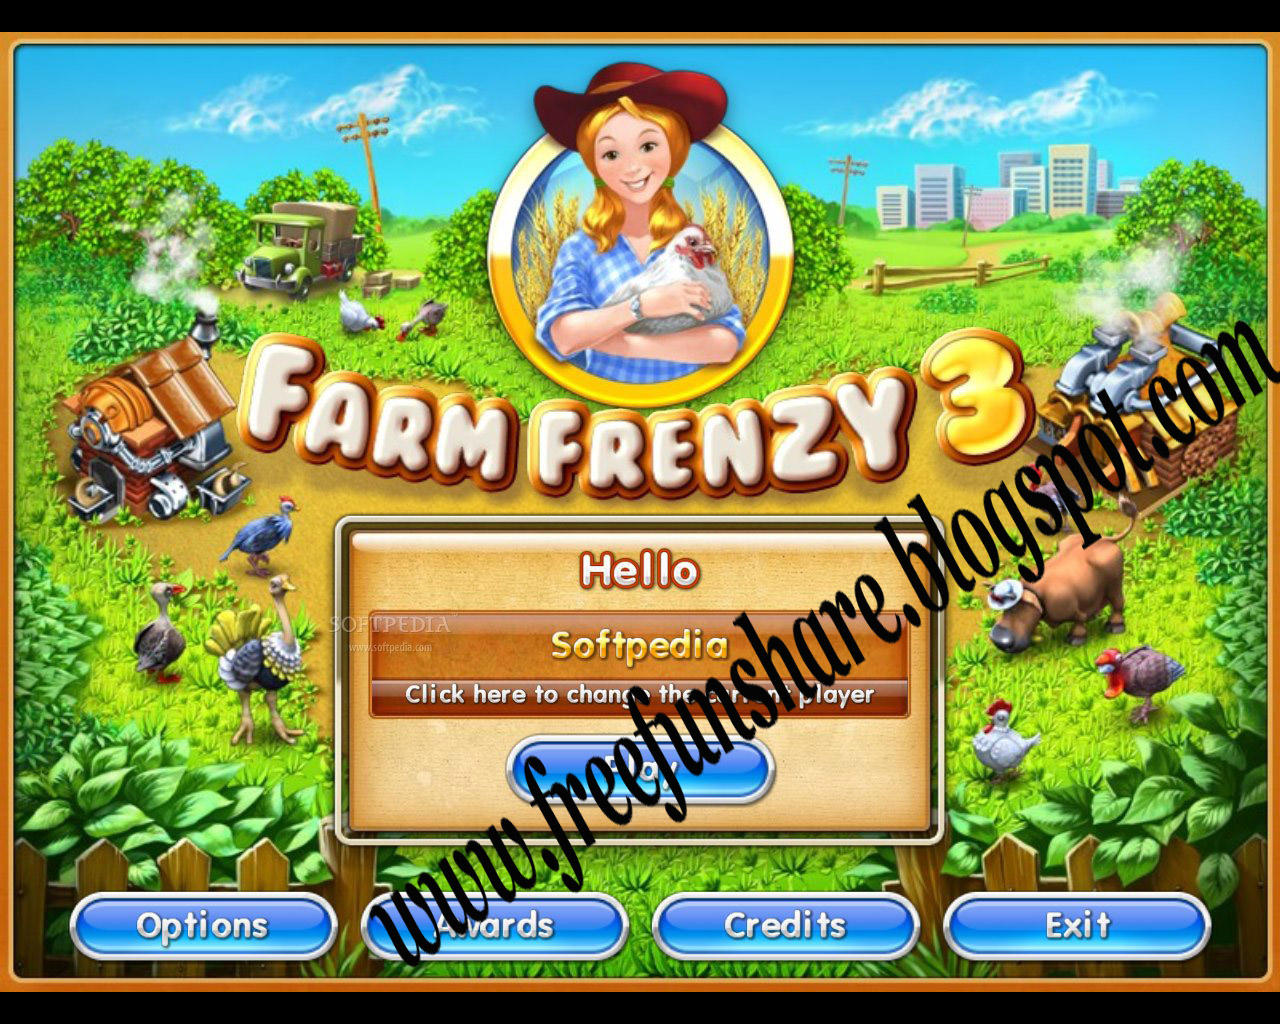 Farm frenzy 3 free. download full version for pc offline